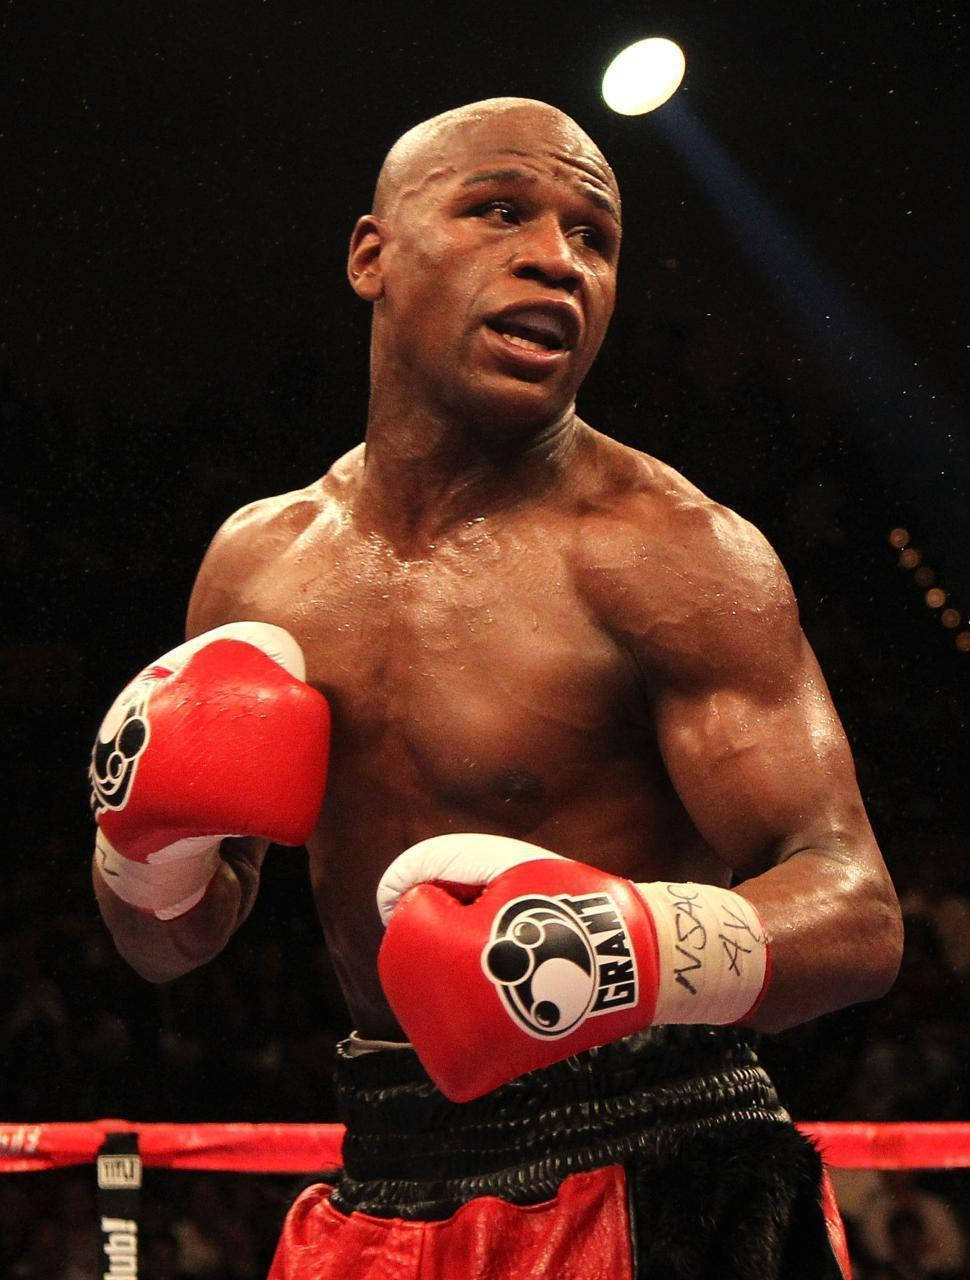 Floyd Mayweather confirms he will rejoin the freak show era of boxing